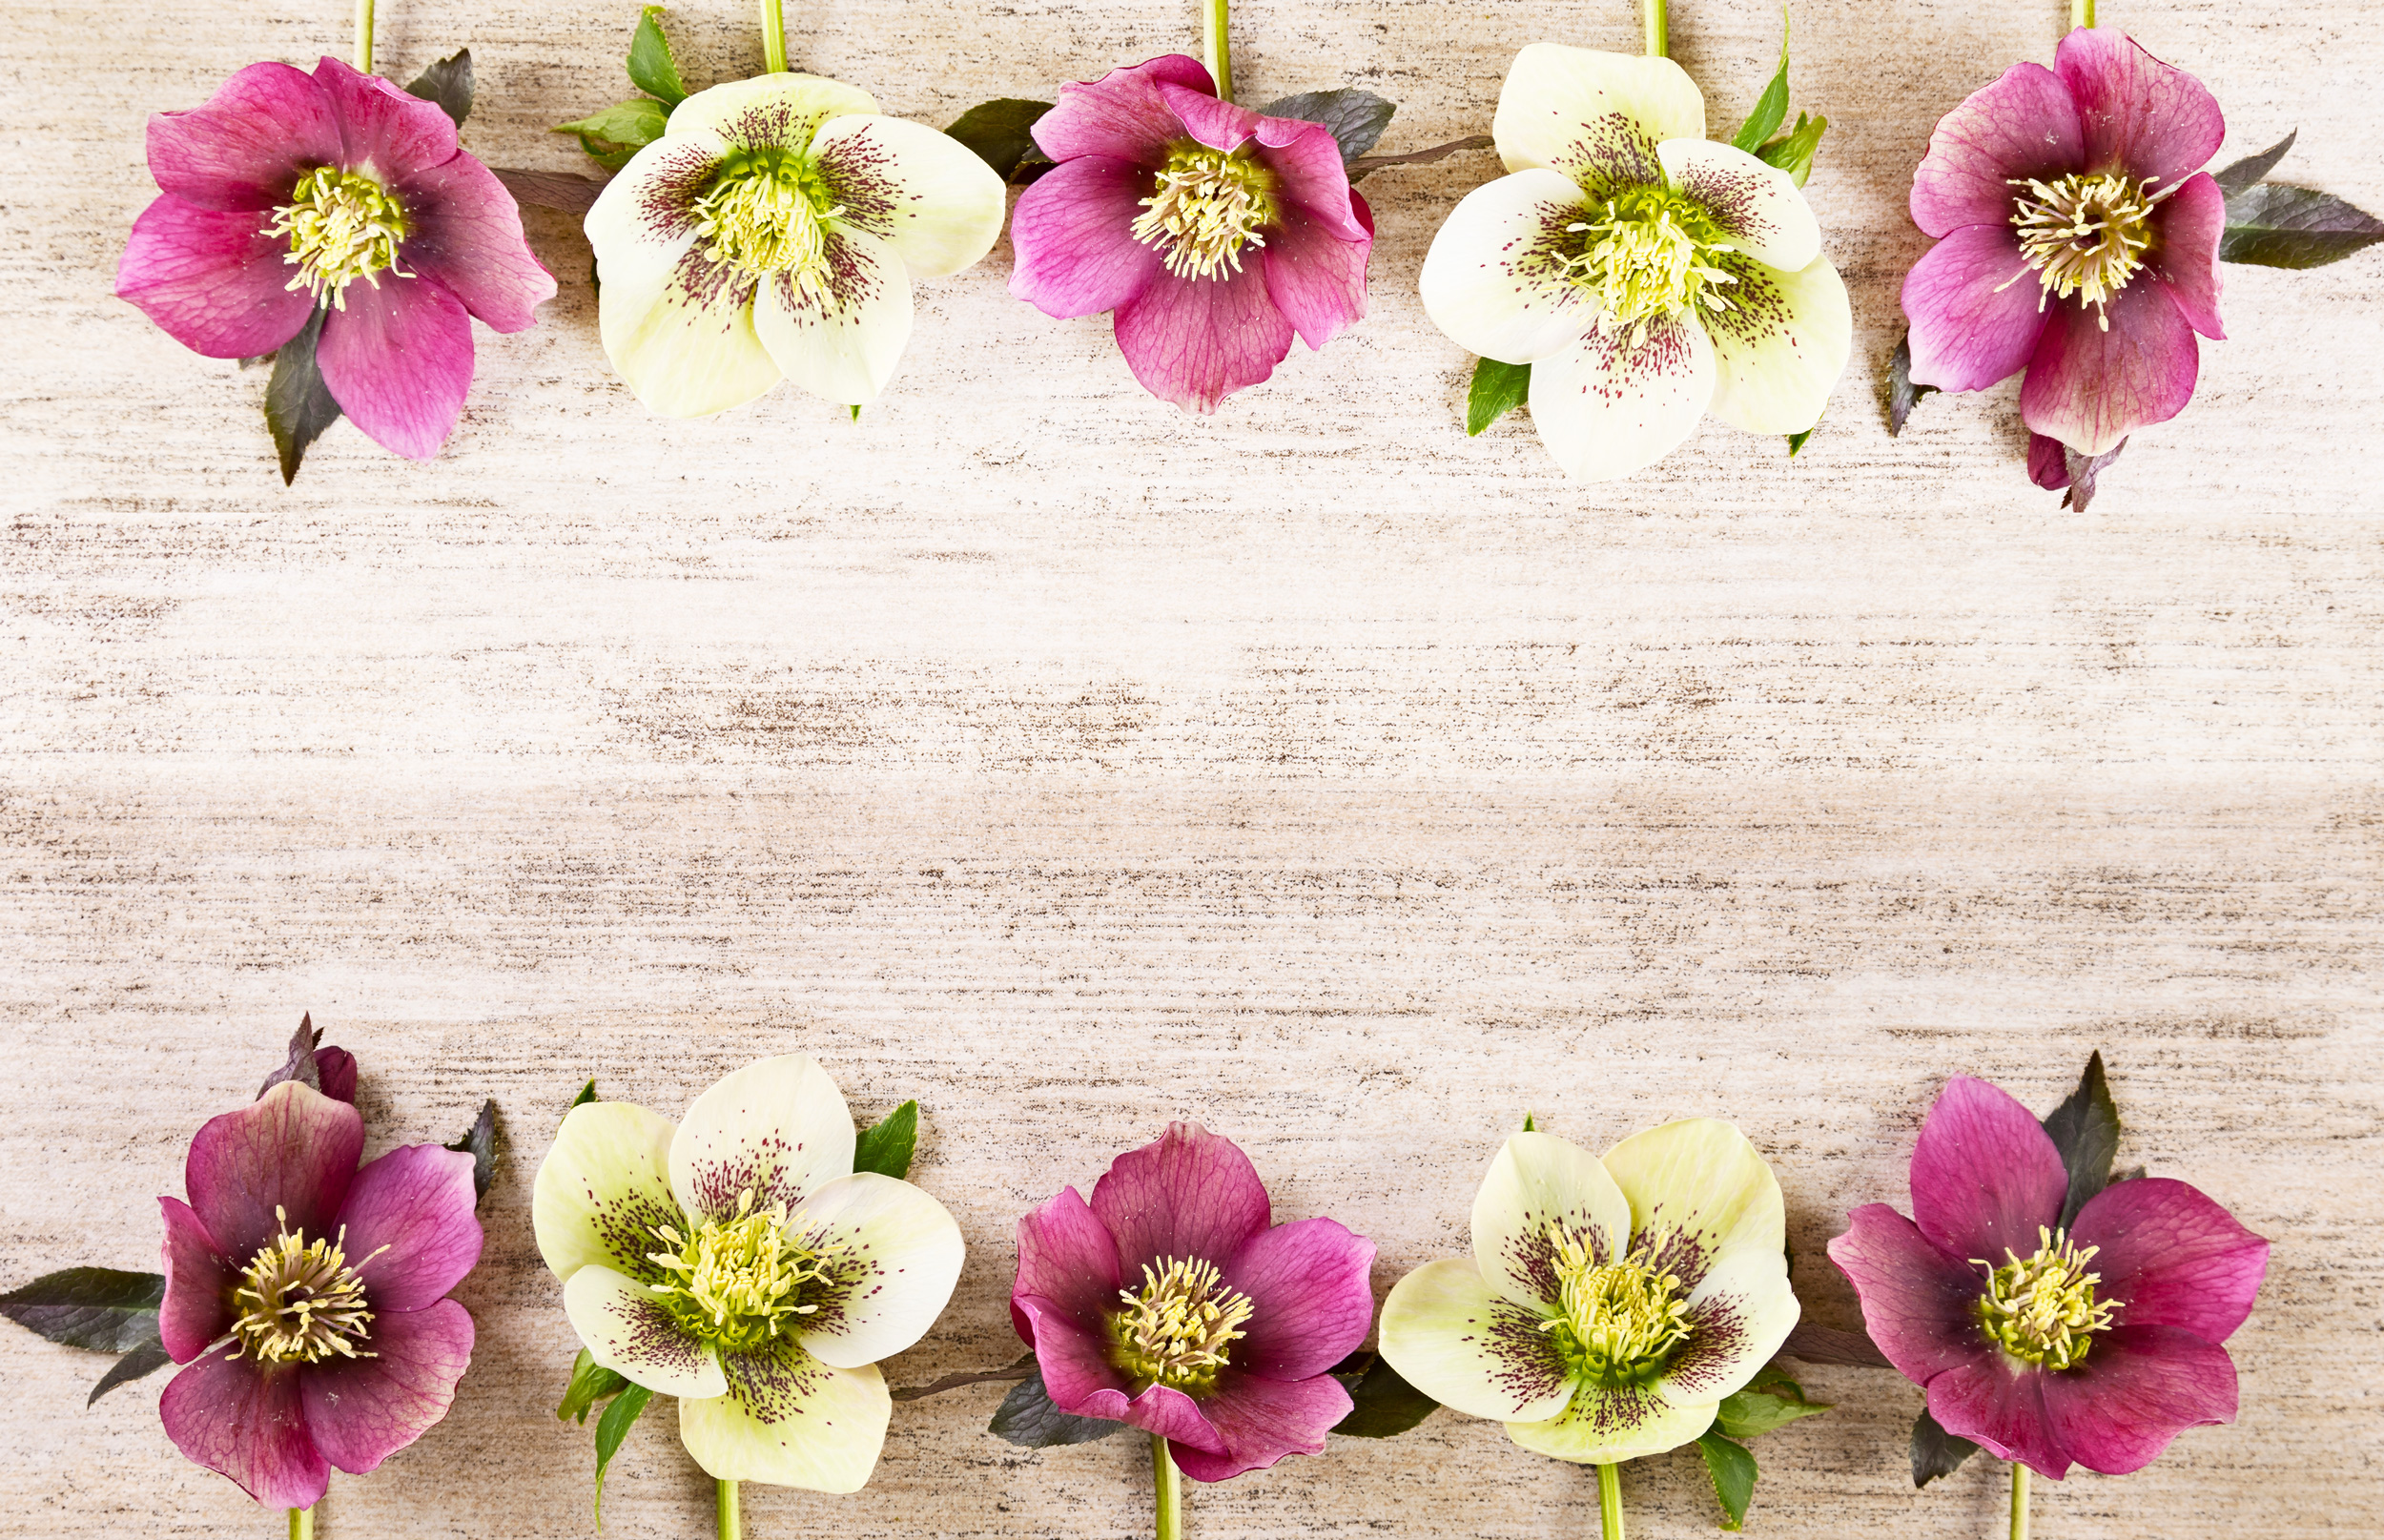 All parts of Hellebores are toxic to people and pets. In some individuals, they can even cause contact dermatitis. It’s best to wear gloves when handling them.